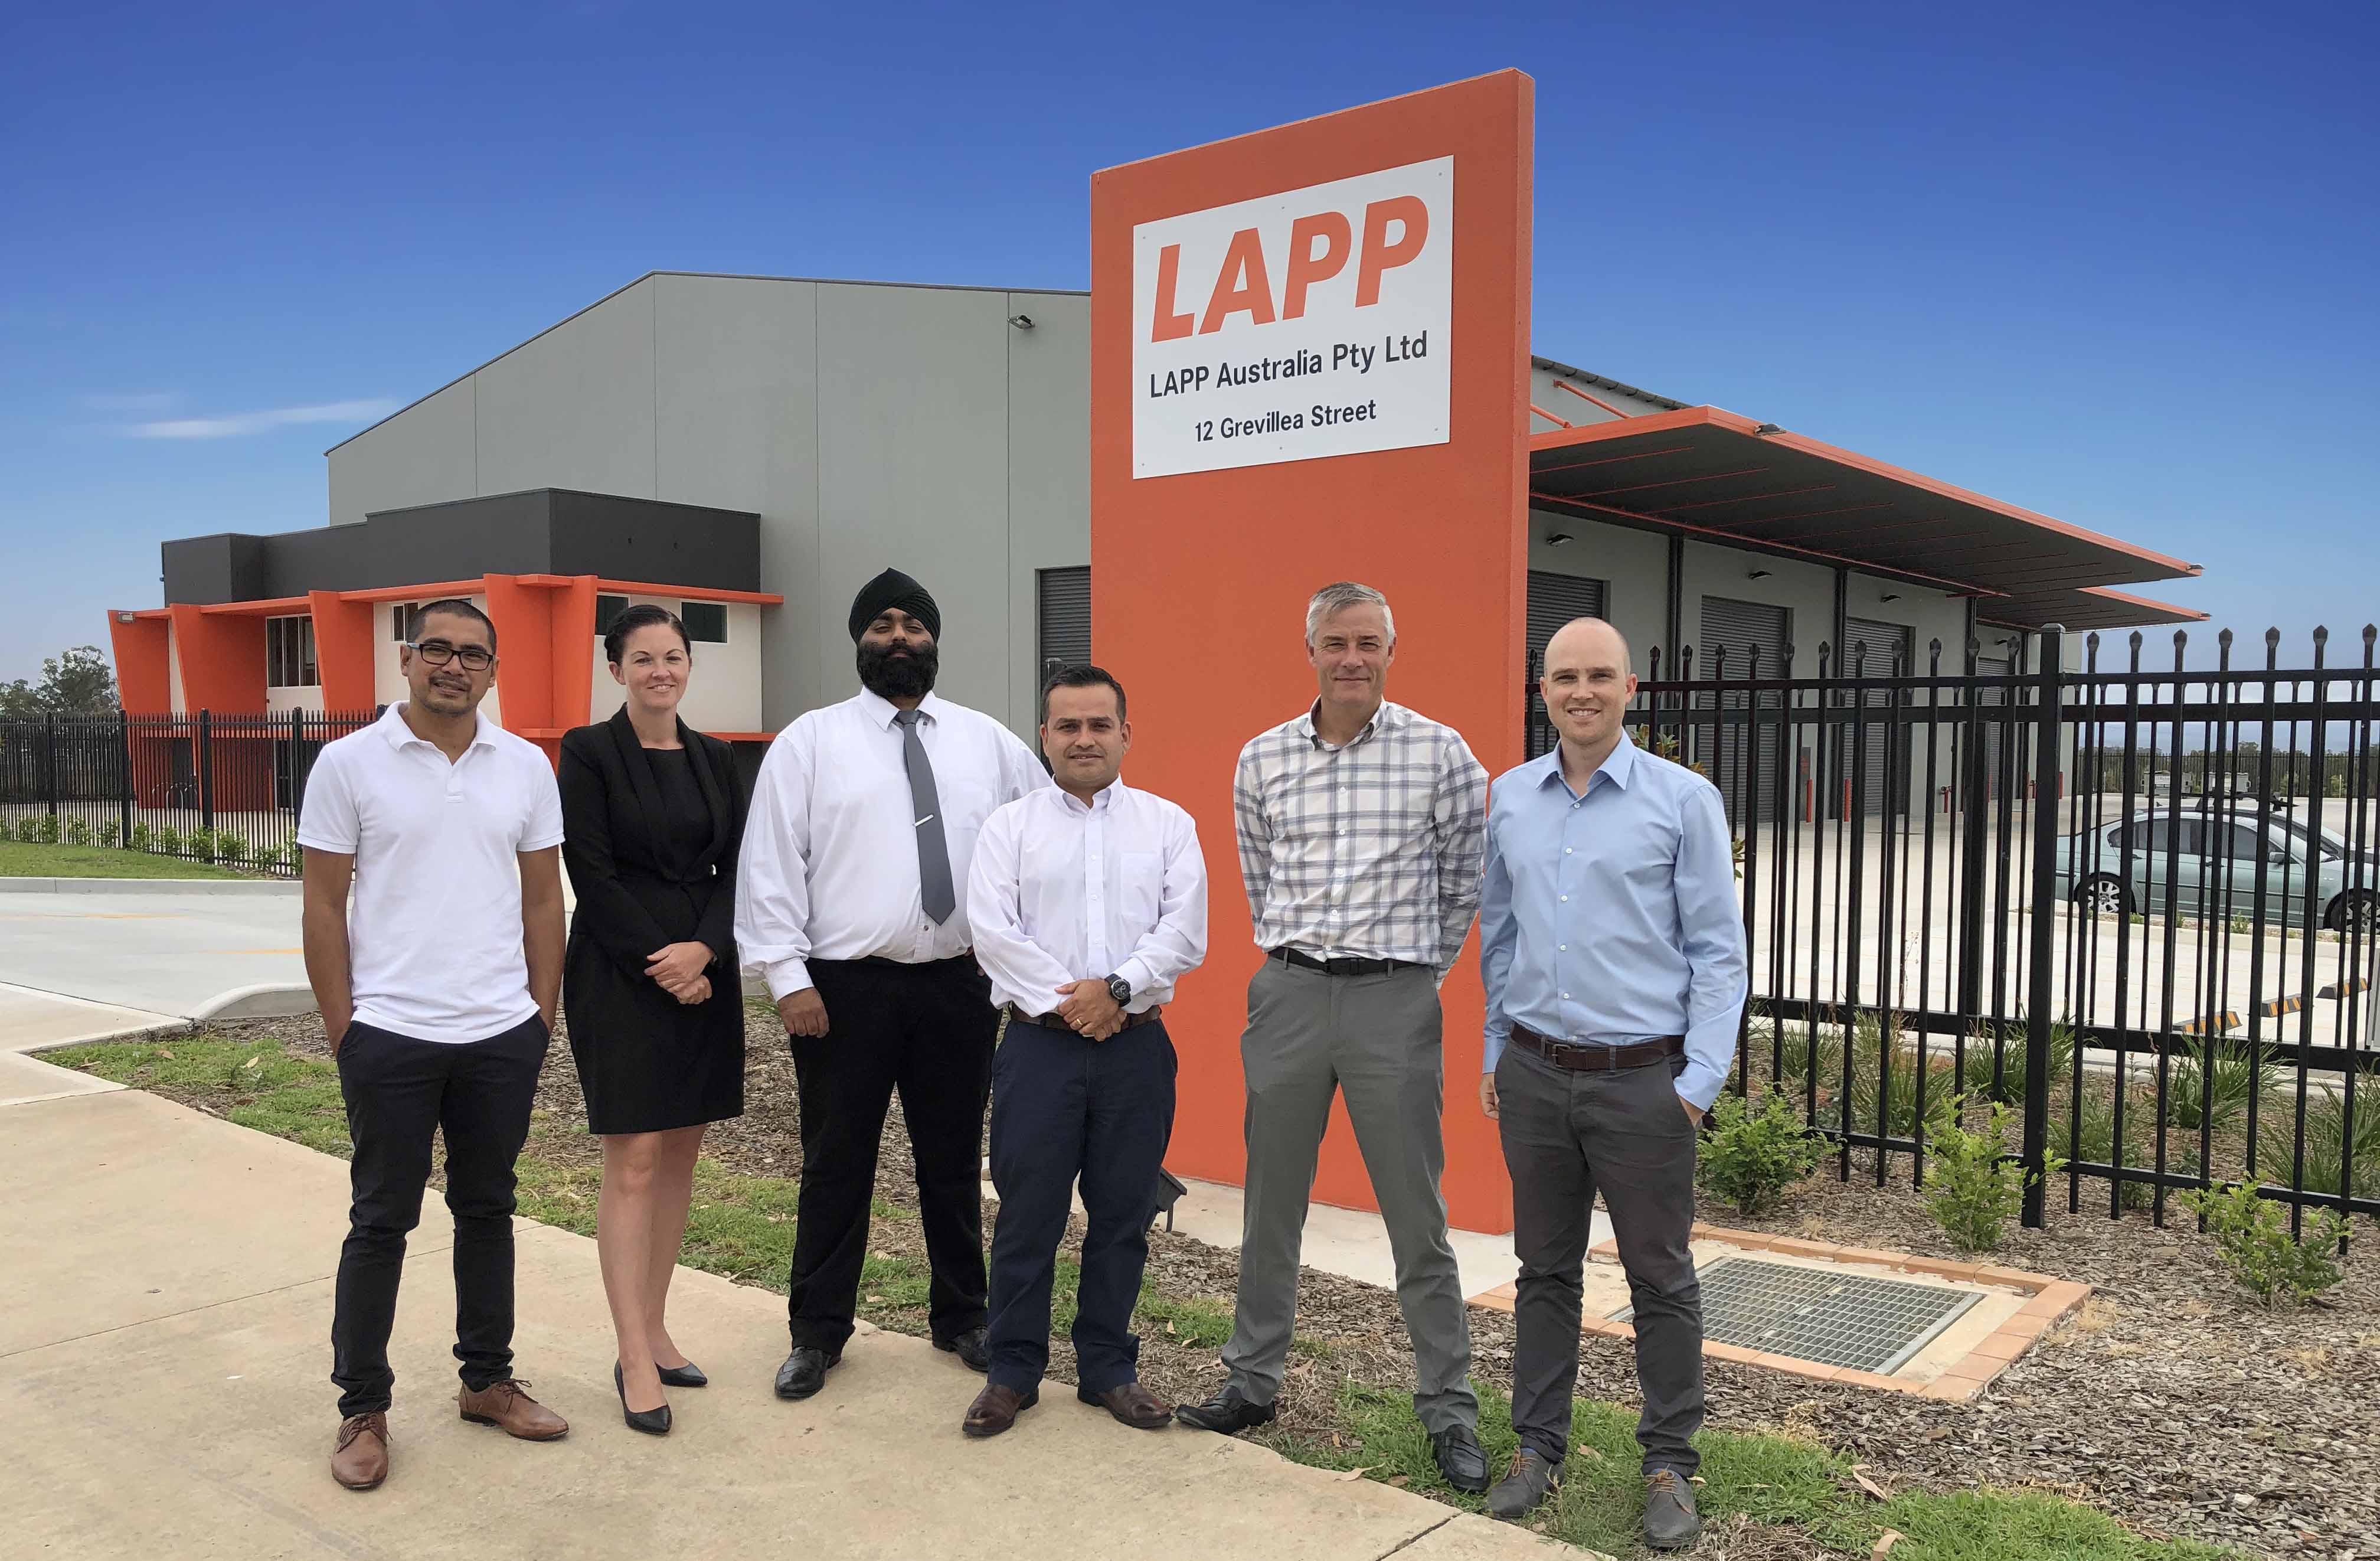 Lapp down under: Full range of products now in Australia